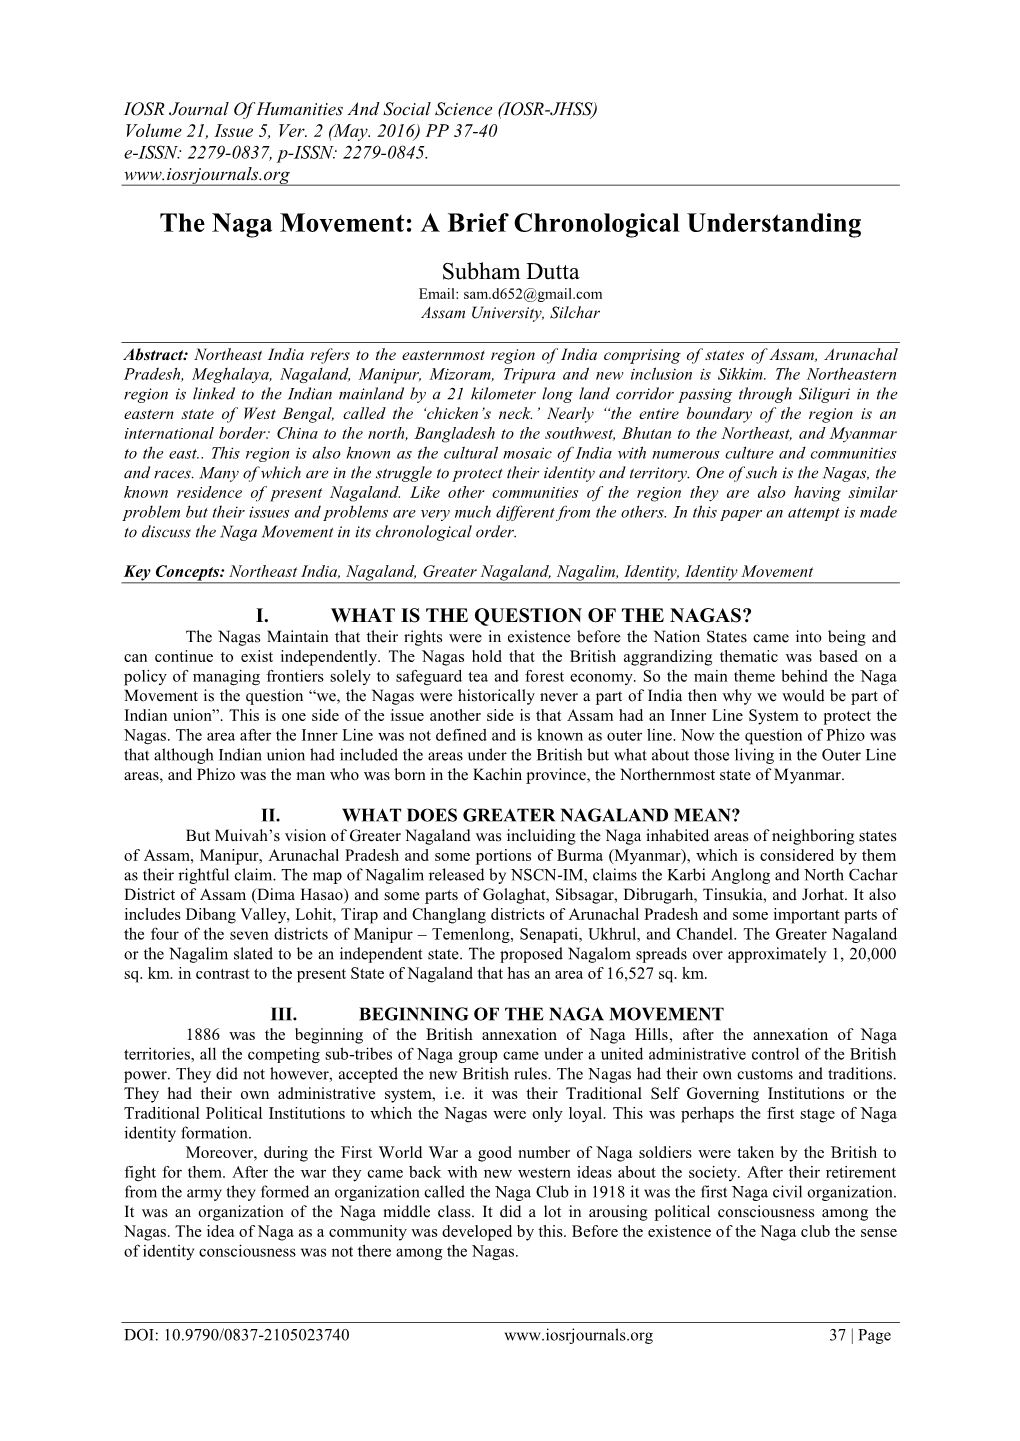 The Naga Movement: a Brief Chronological Understanding